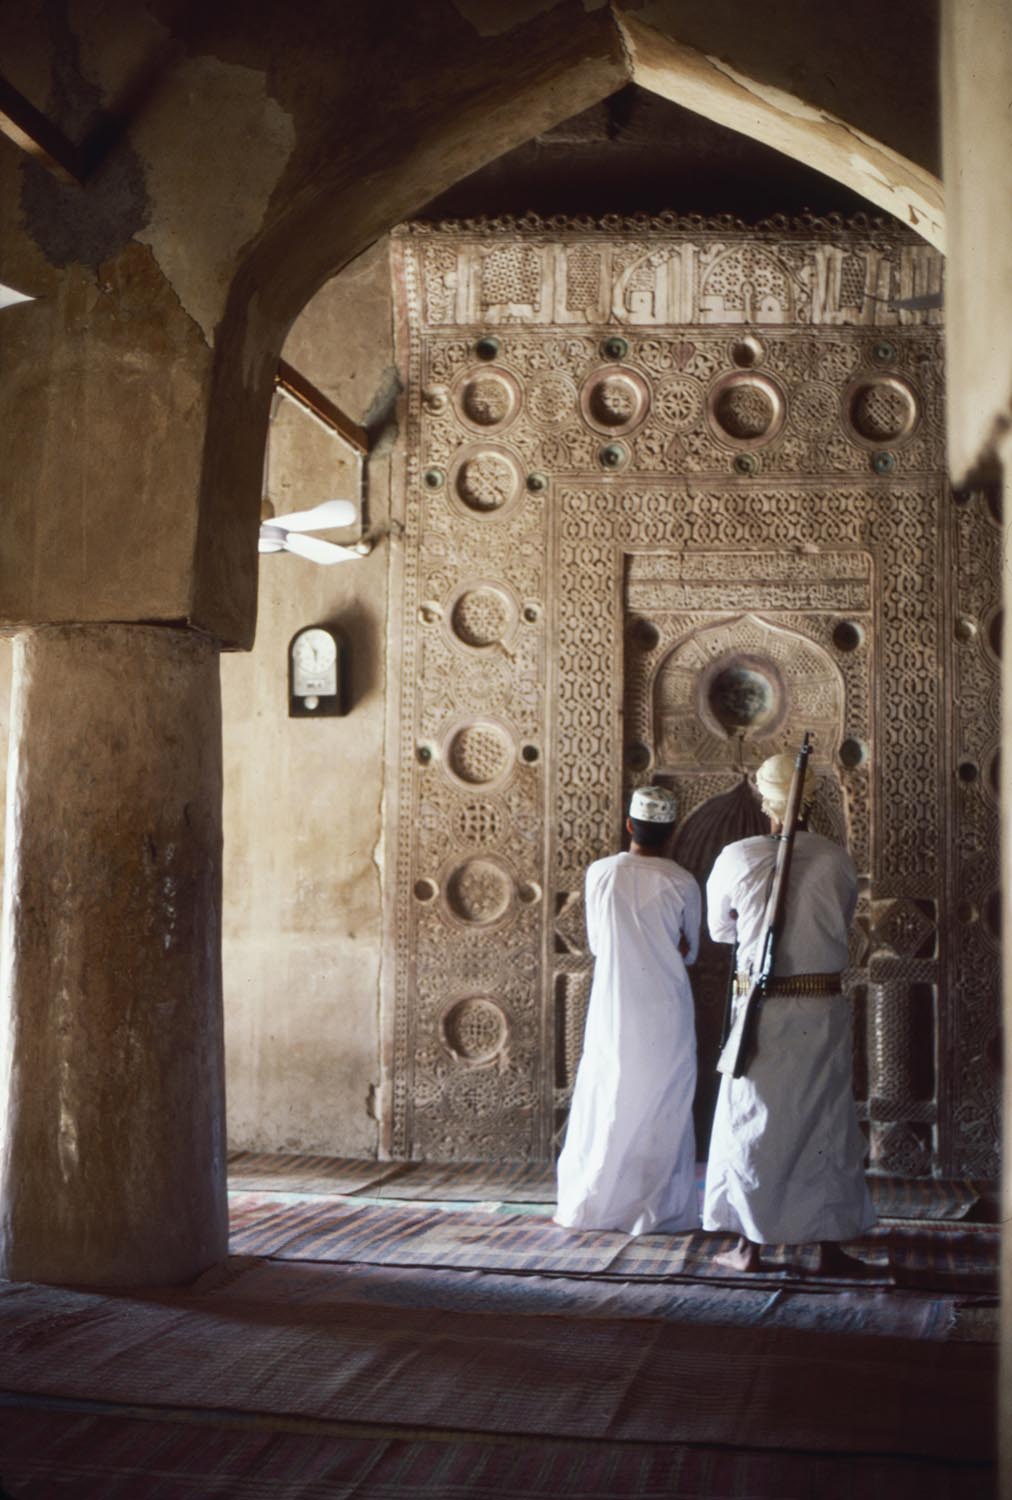 View of mihrab.